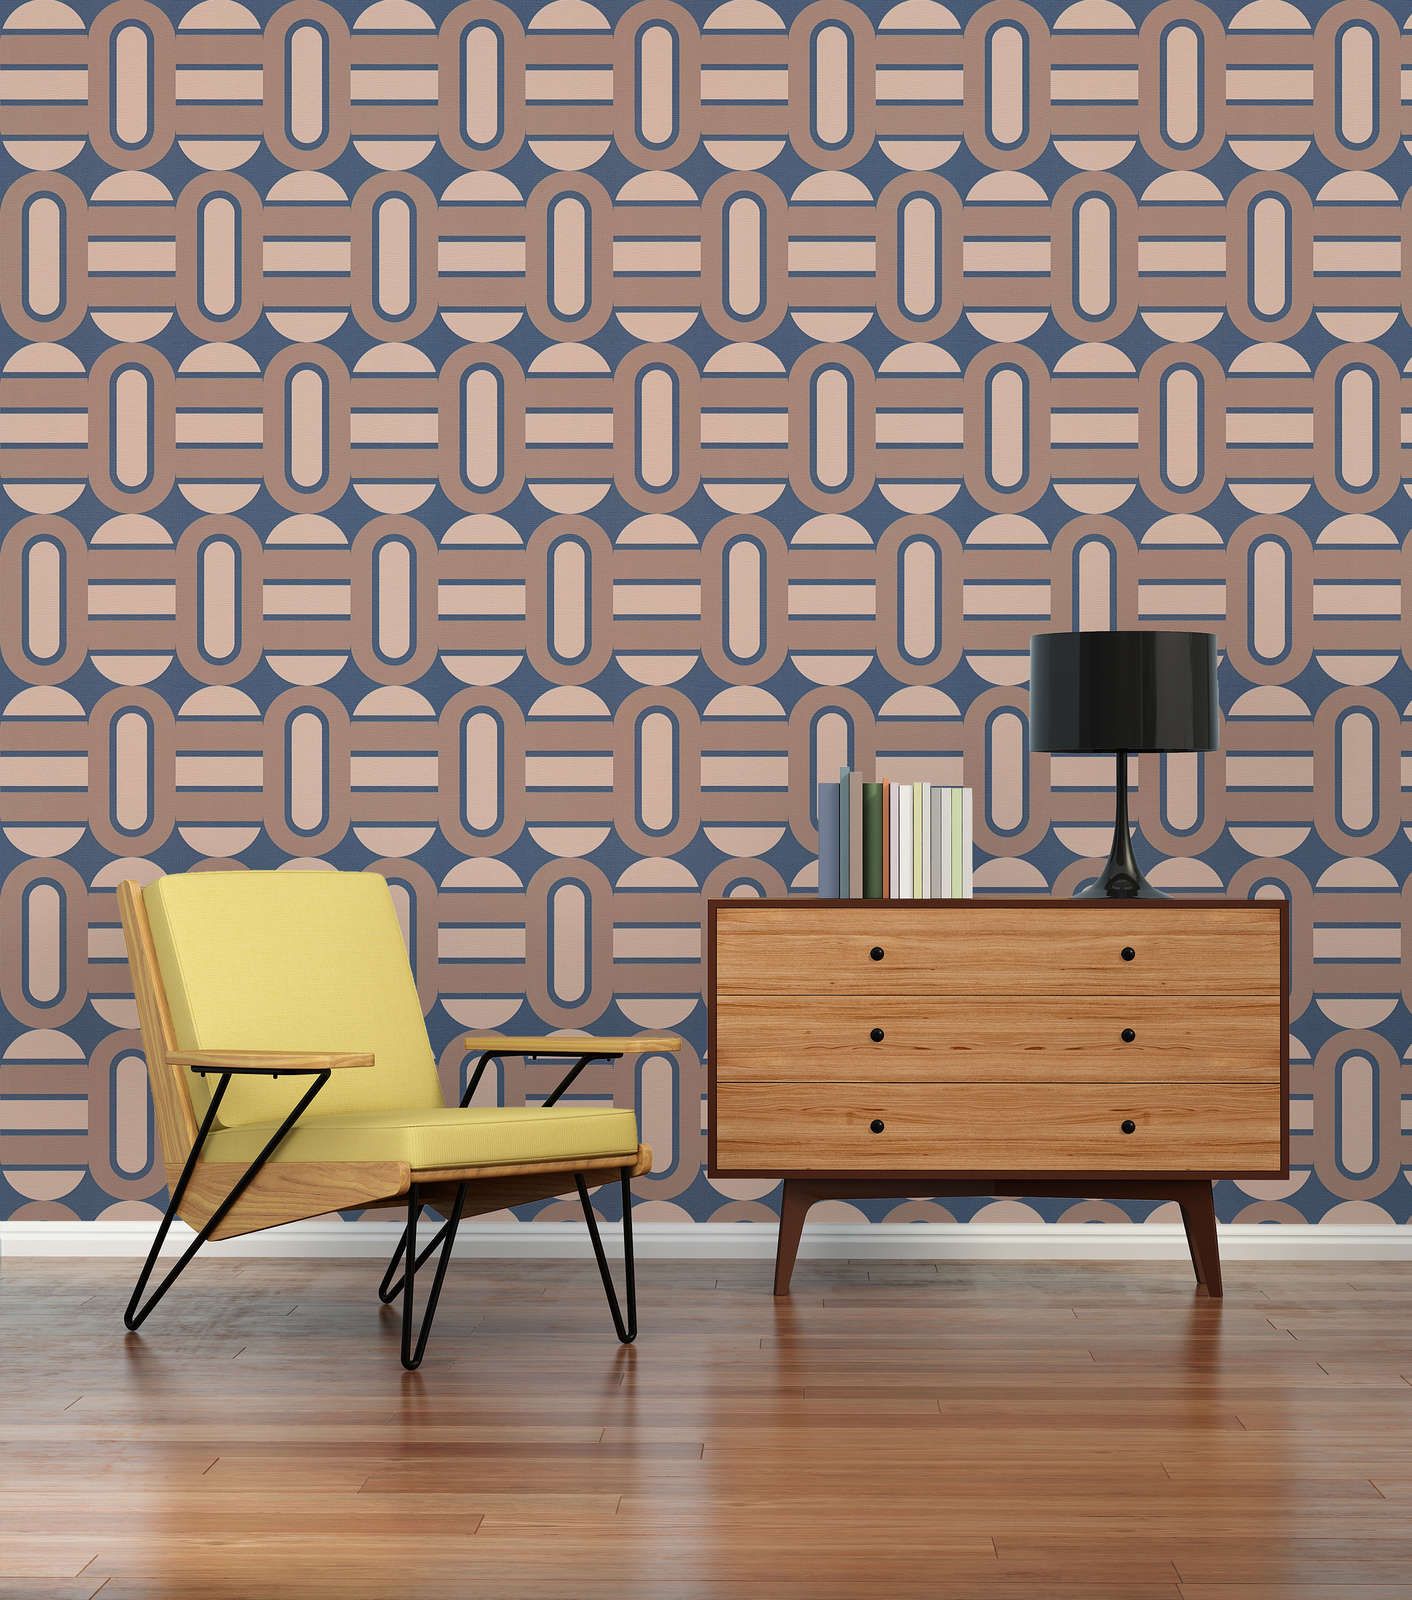             Retro style wallpaper decorated with ovals and bars - blue, brown, beige
        